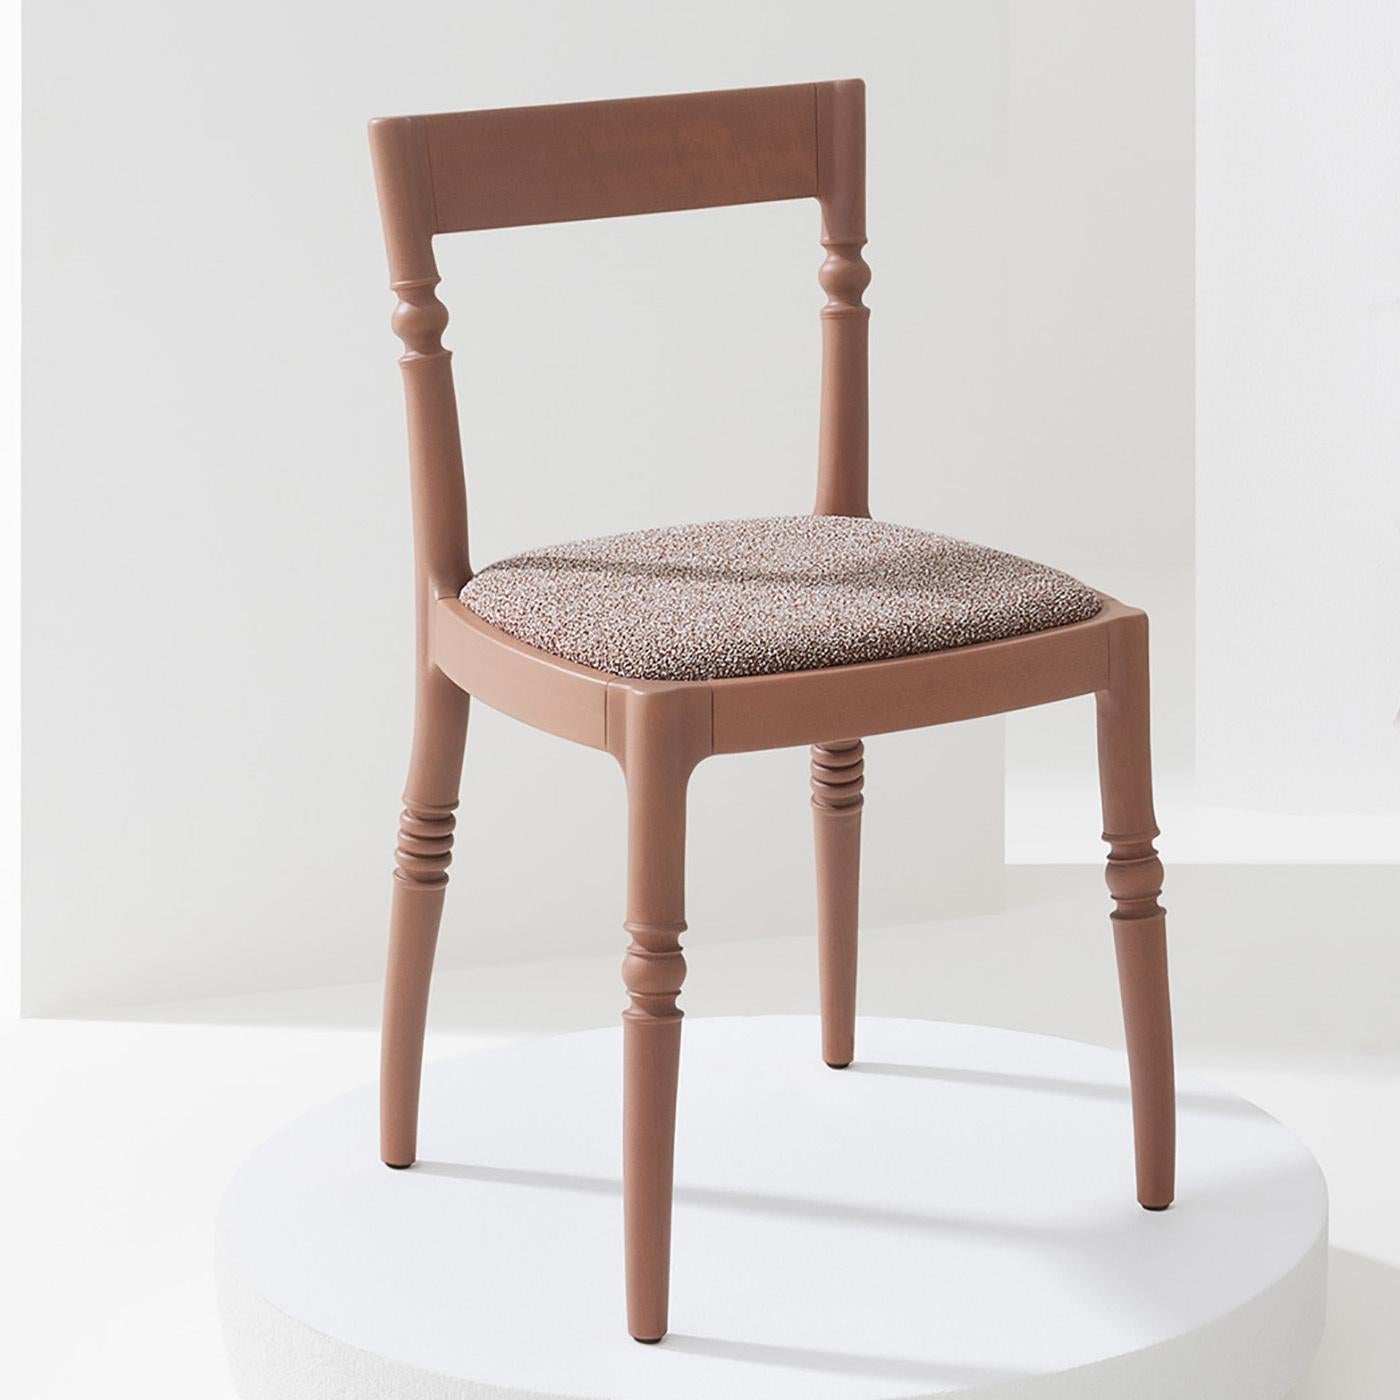 Fashioned of prized beech, this chair exudes a seductive flair with its sinuous silhouette lacquered in beige red. A superb detail made of alternating convex and concave lines enlivens the legs' profile, the rear ones gracefully extending upwards as